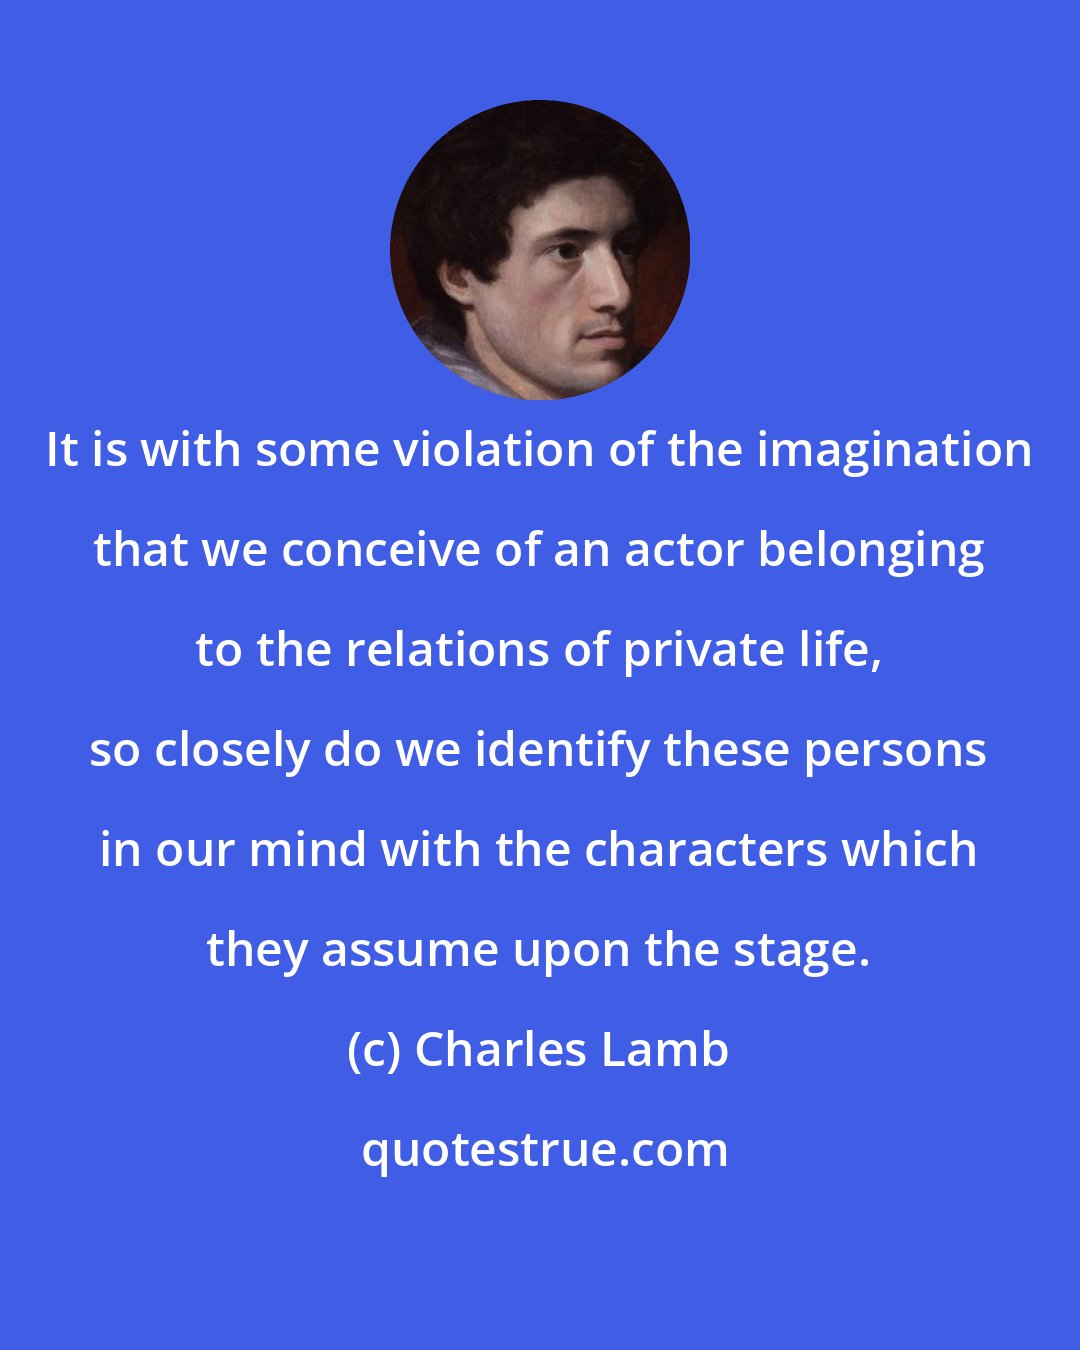 Charles Lamb: It is with some violation of the imagination that we conceive of an actor belonging to the relations of private life, so closely do we identify these persons in our mind with the characters which they assume upon the stage.